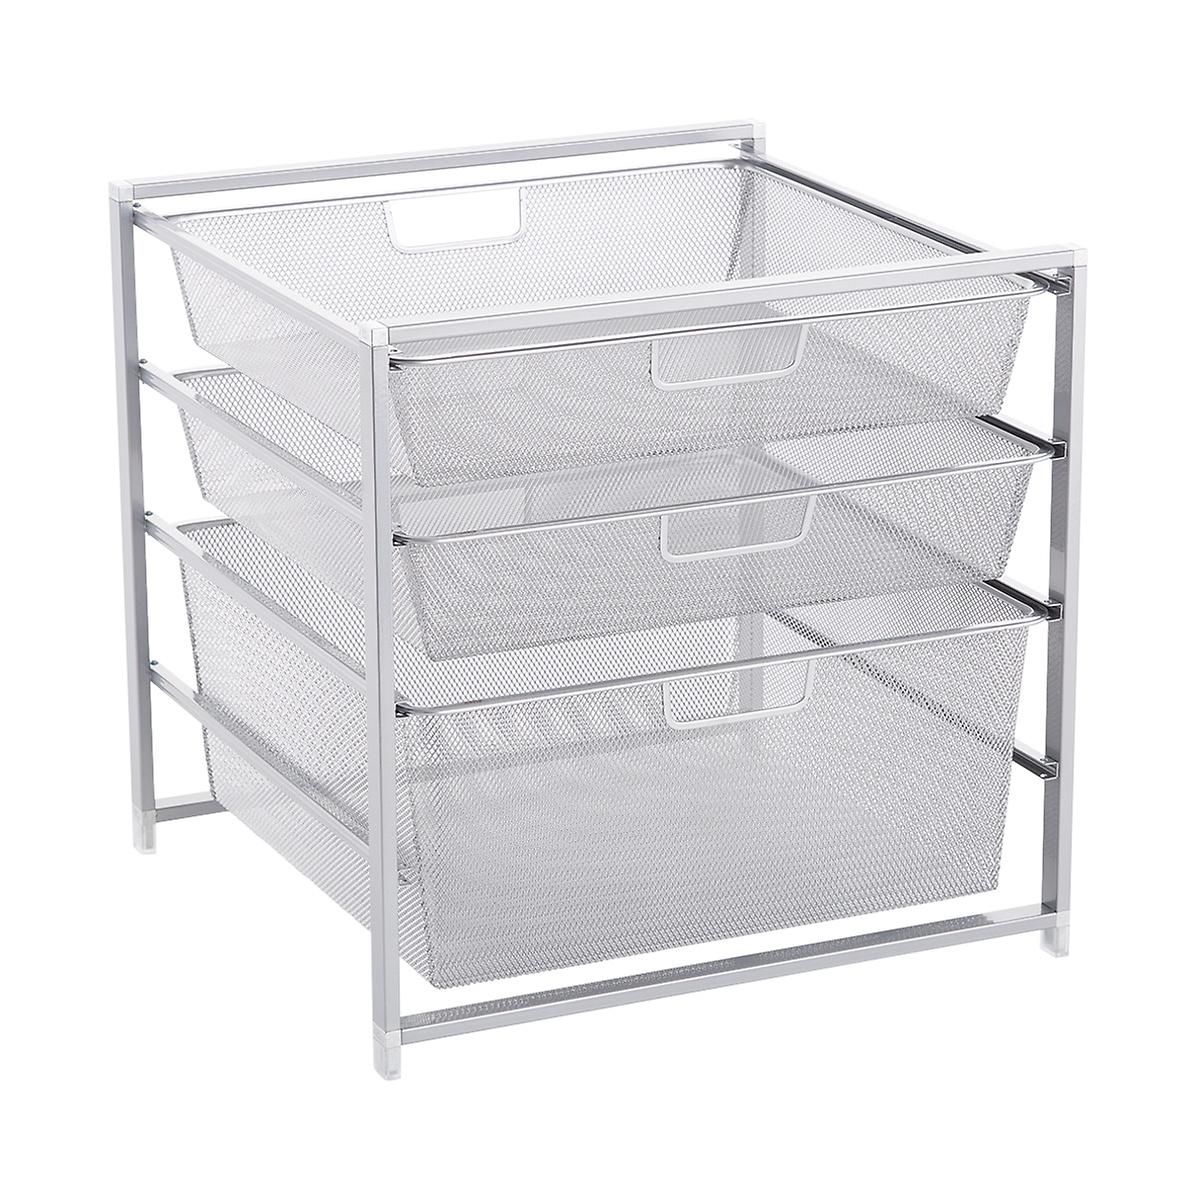 Elfa Narrow Cabinet Drawer Solution Platinum | The Container Store